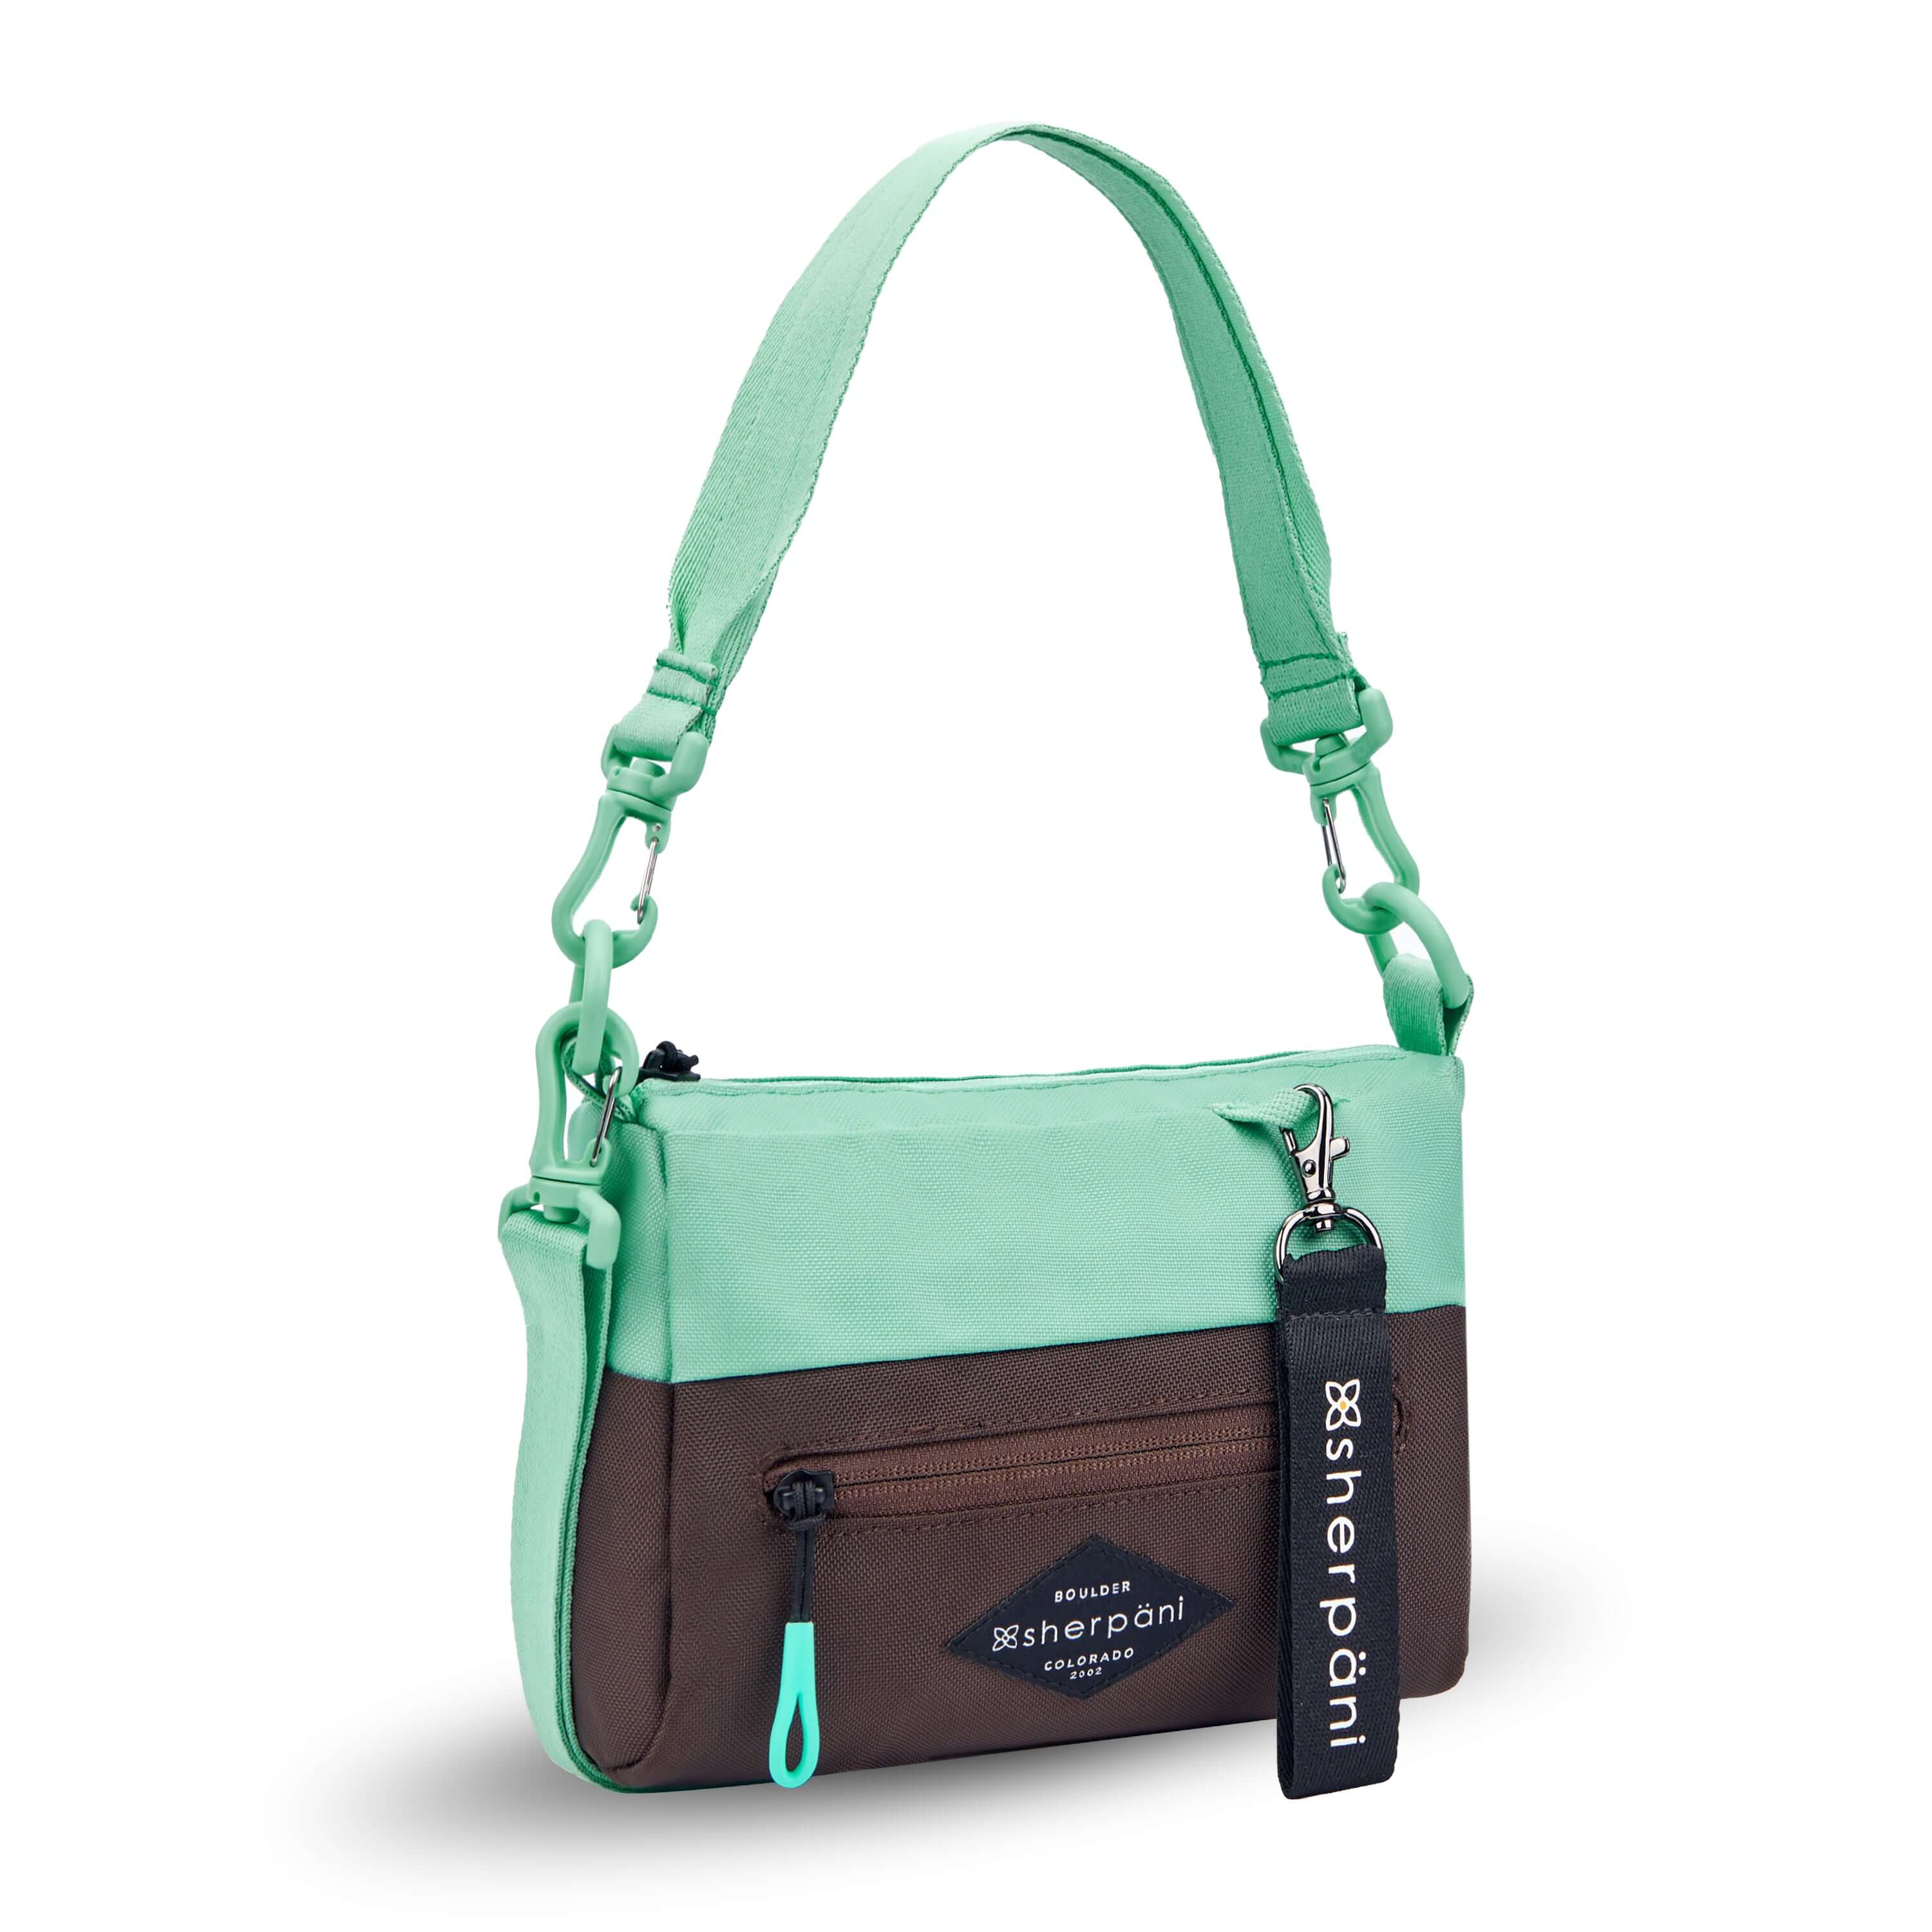 Angled front view of Sherpani's purse, the Skye in Seagreen. It is two-toned, the top half of the bag is light green and the bottom half of the bag is brown. There is an external zipper compartment with an easy-pull zipper accented in light green. There is a branded Sherpani keychain clipped to the upper right corner. The bag has a detachable short strap and a longer detachable/adjustable crossbody strap. #color_seagreen